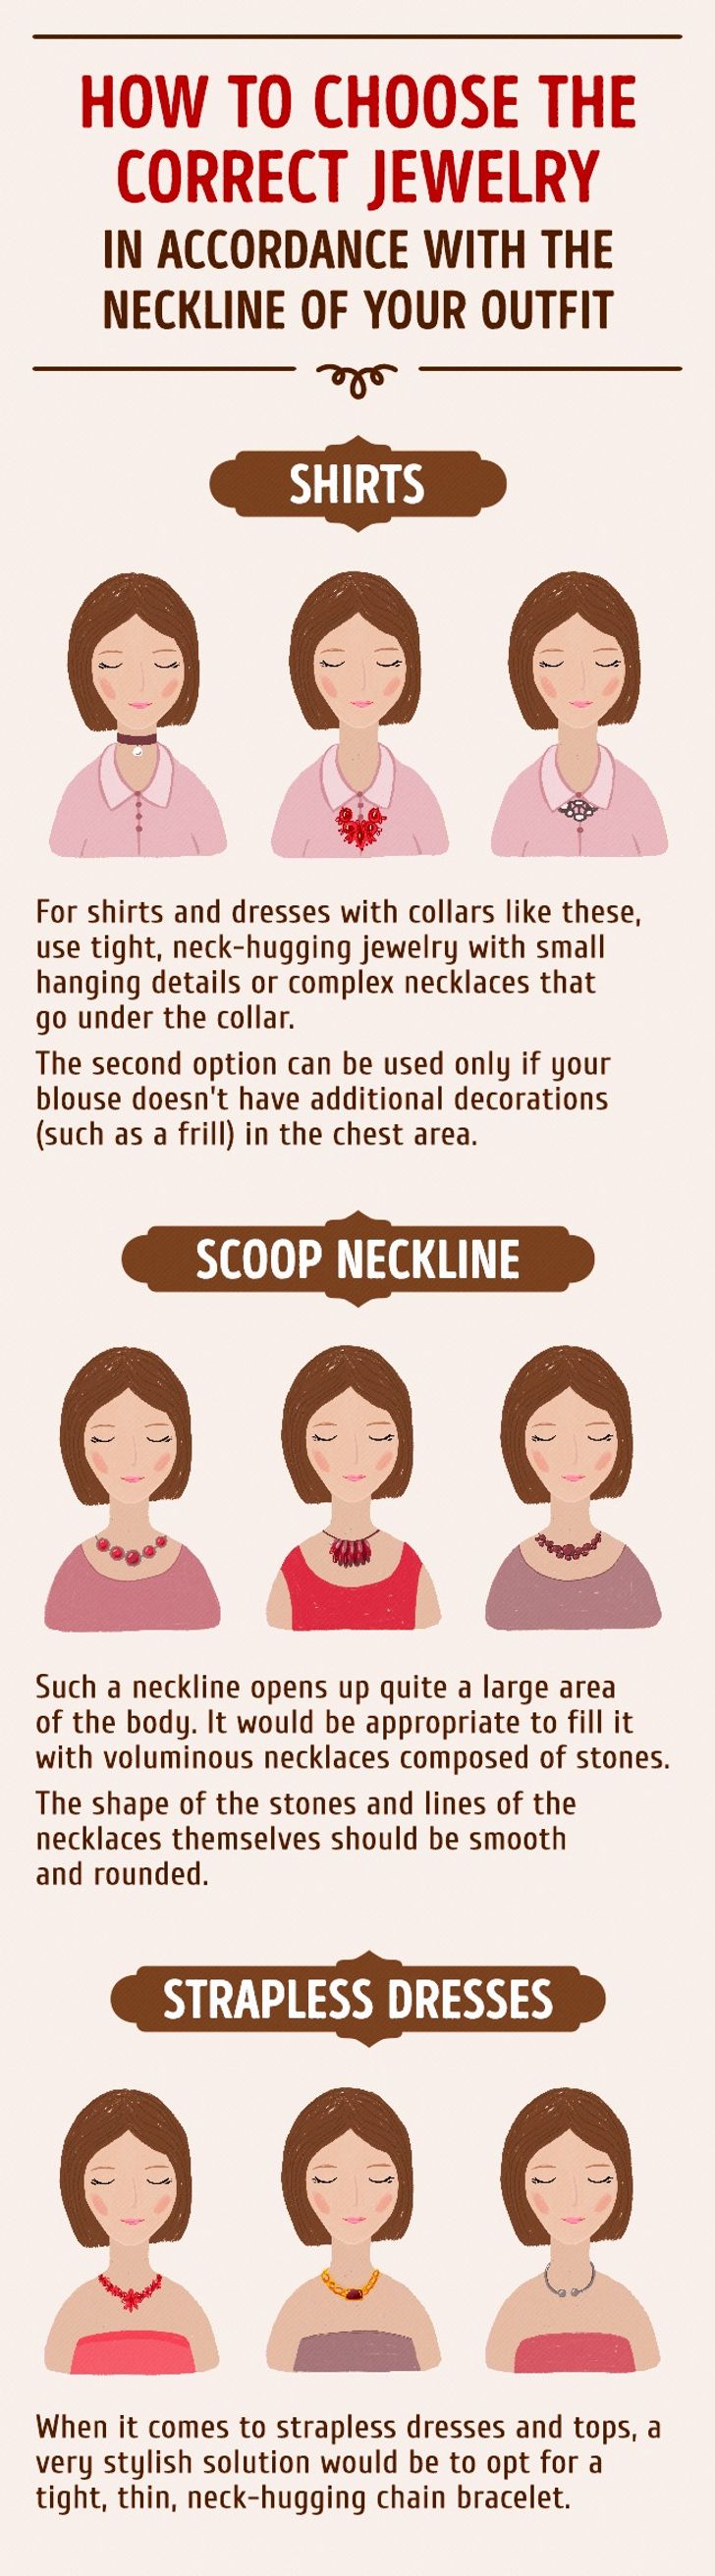 A Guide to Help You Select the Right Jewelry to Match Your Clothes